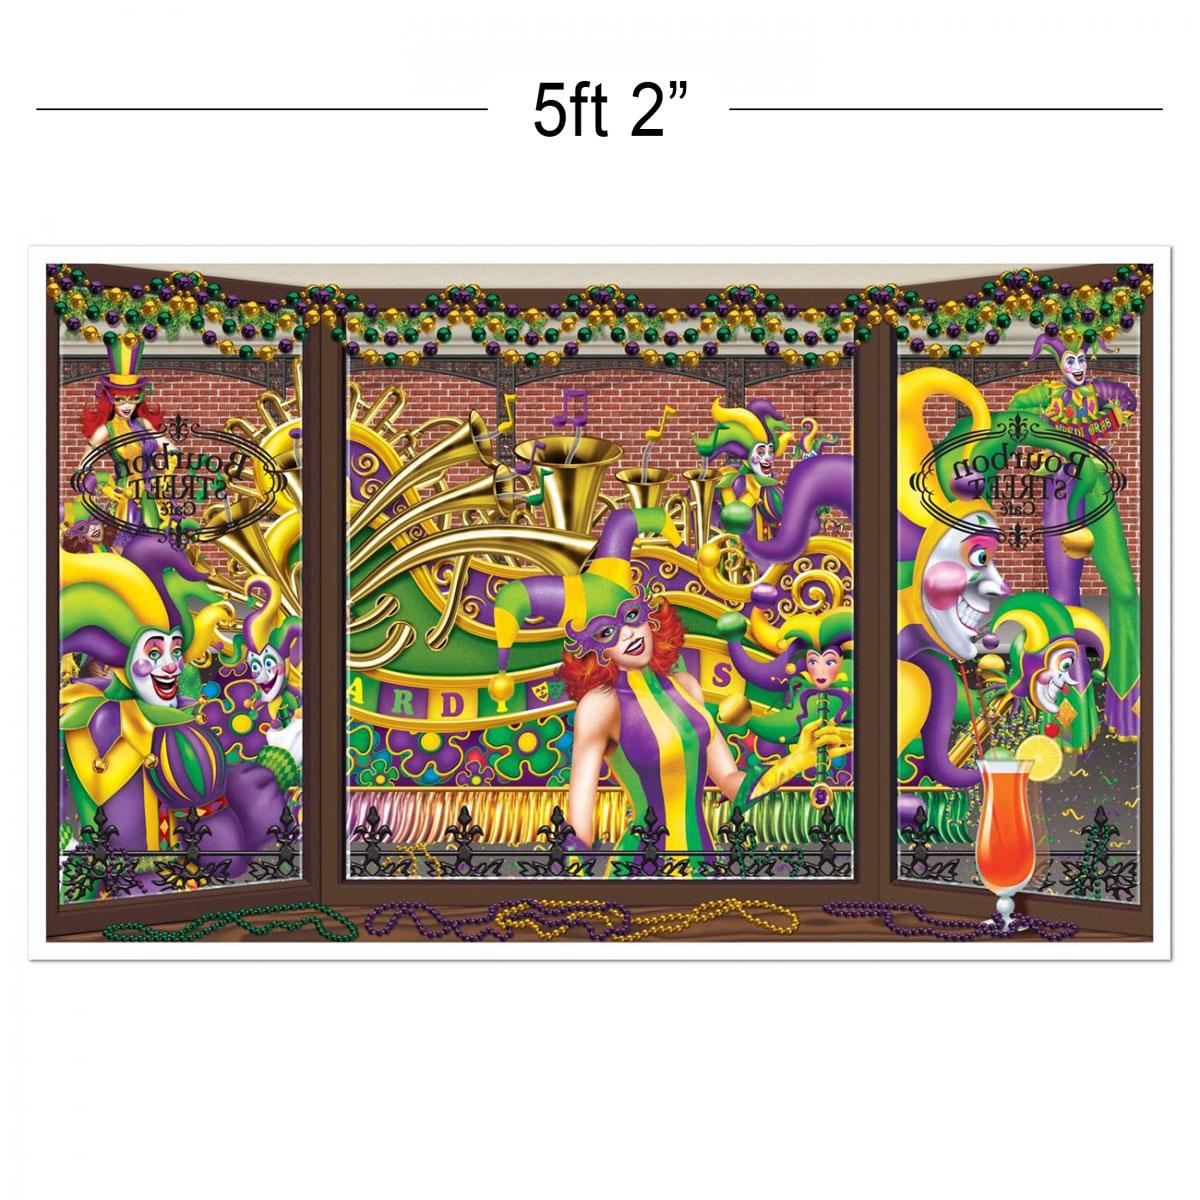 Mardi Gras Insta-Mural - 5ft 2" x 3ft 2" by Beistle 52304 available here at Karnival Costumes online party shop